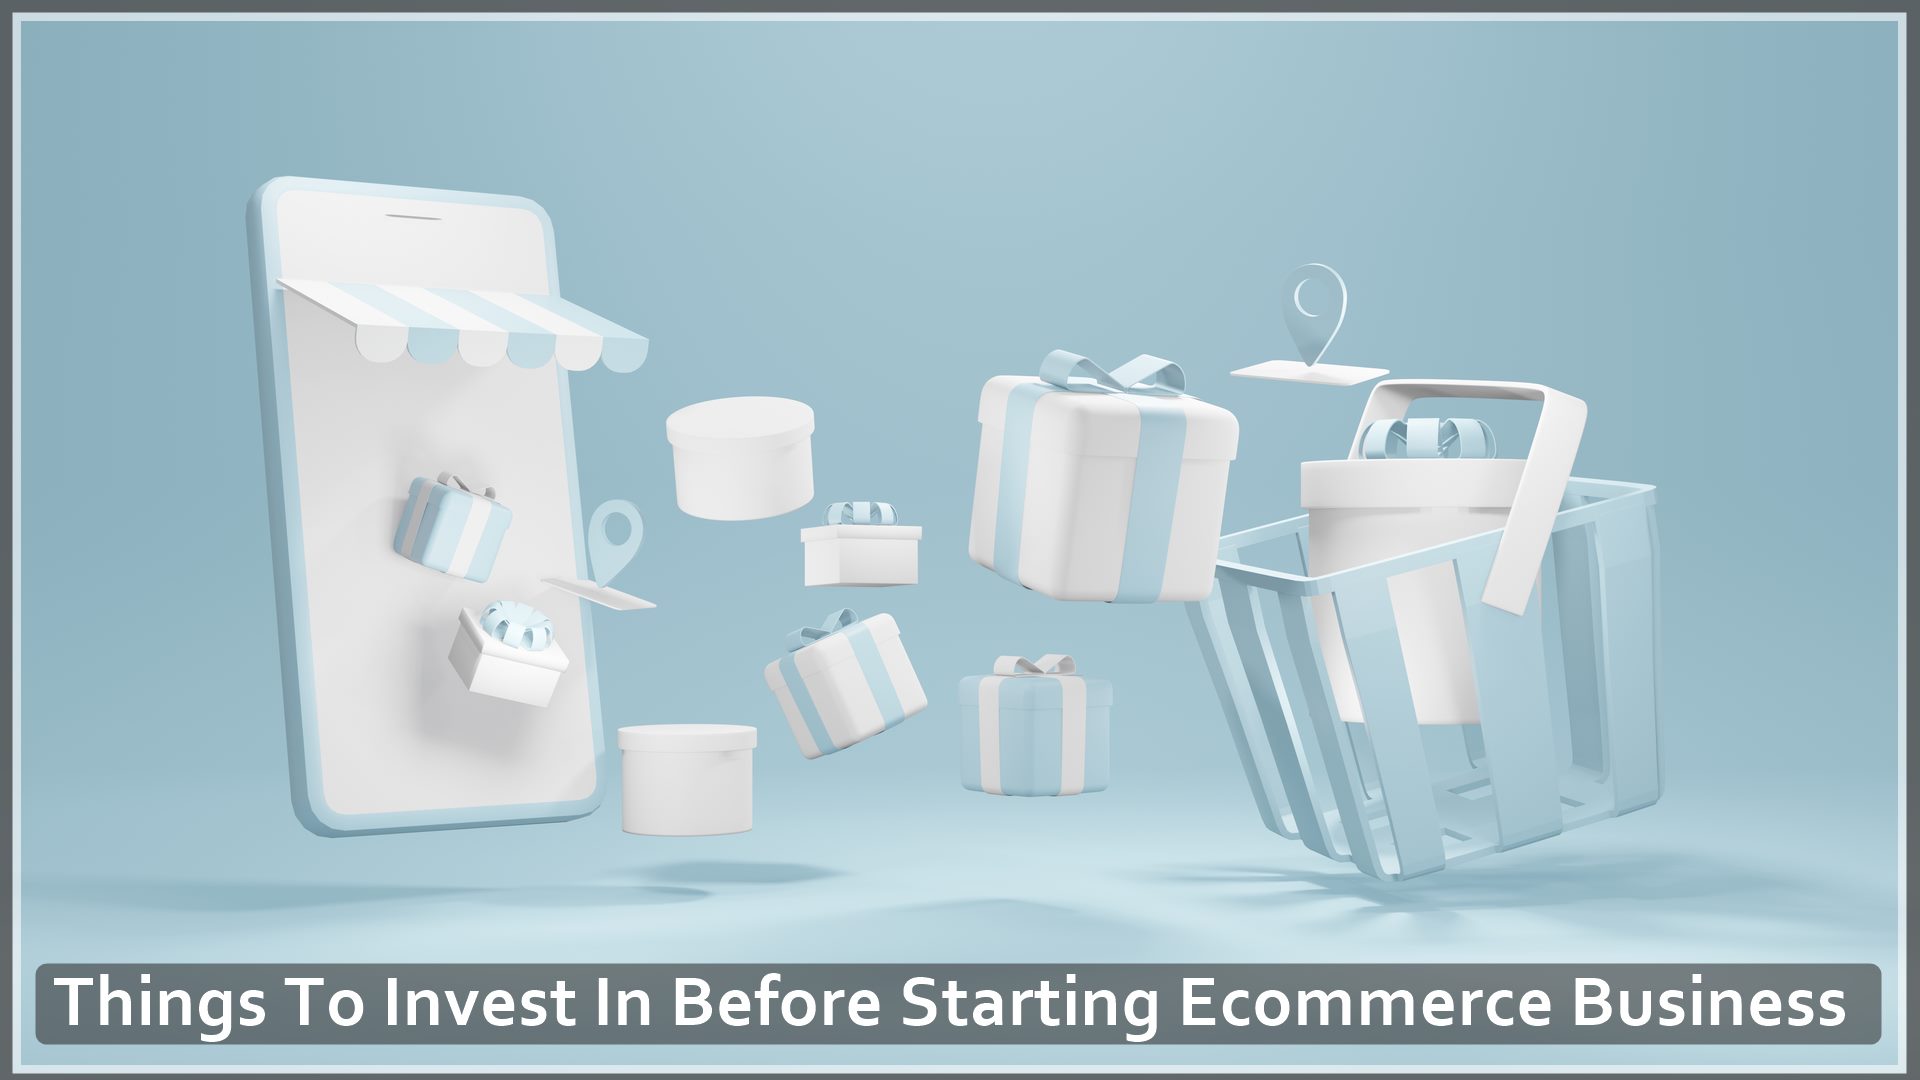 Things To Invest In Before Starting Ecommerce Business